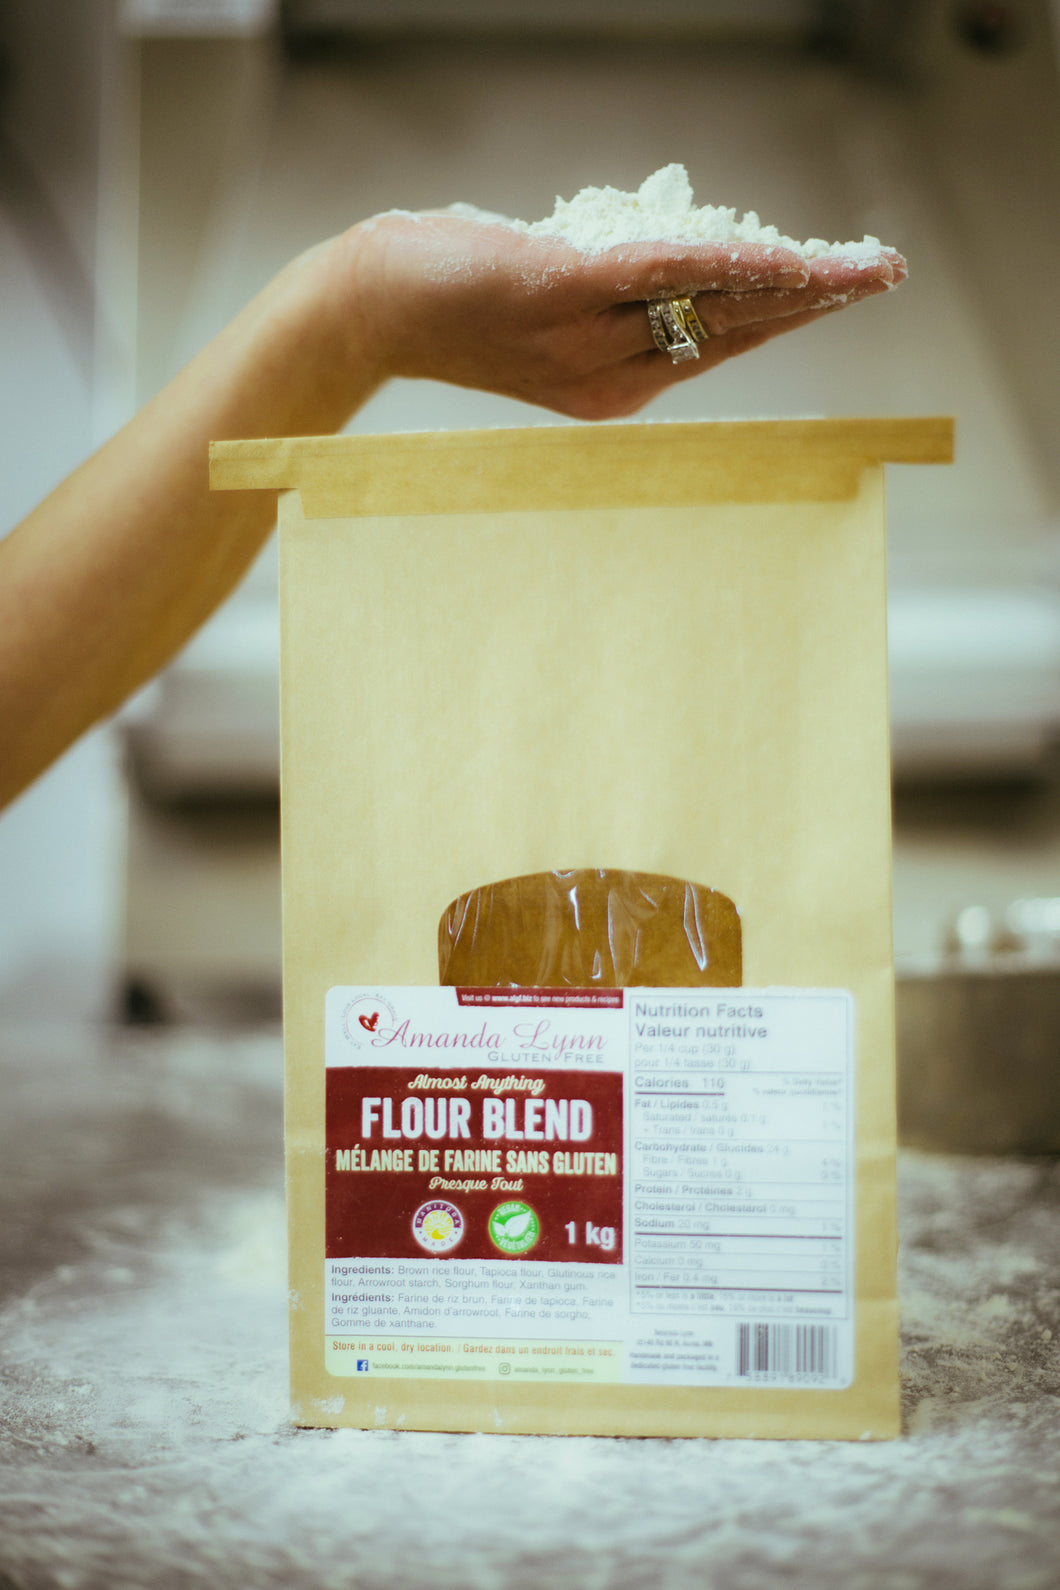 Almost Anything Gluten Free Flour Blend